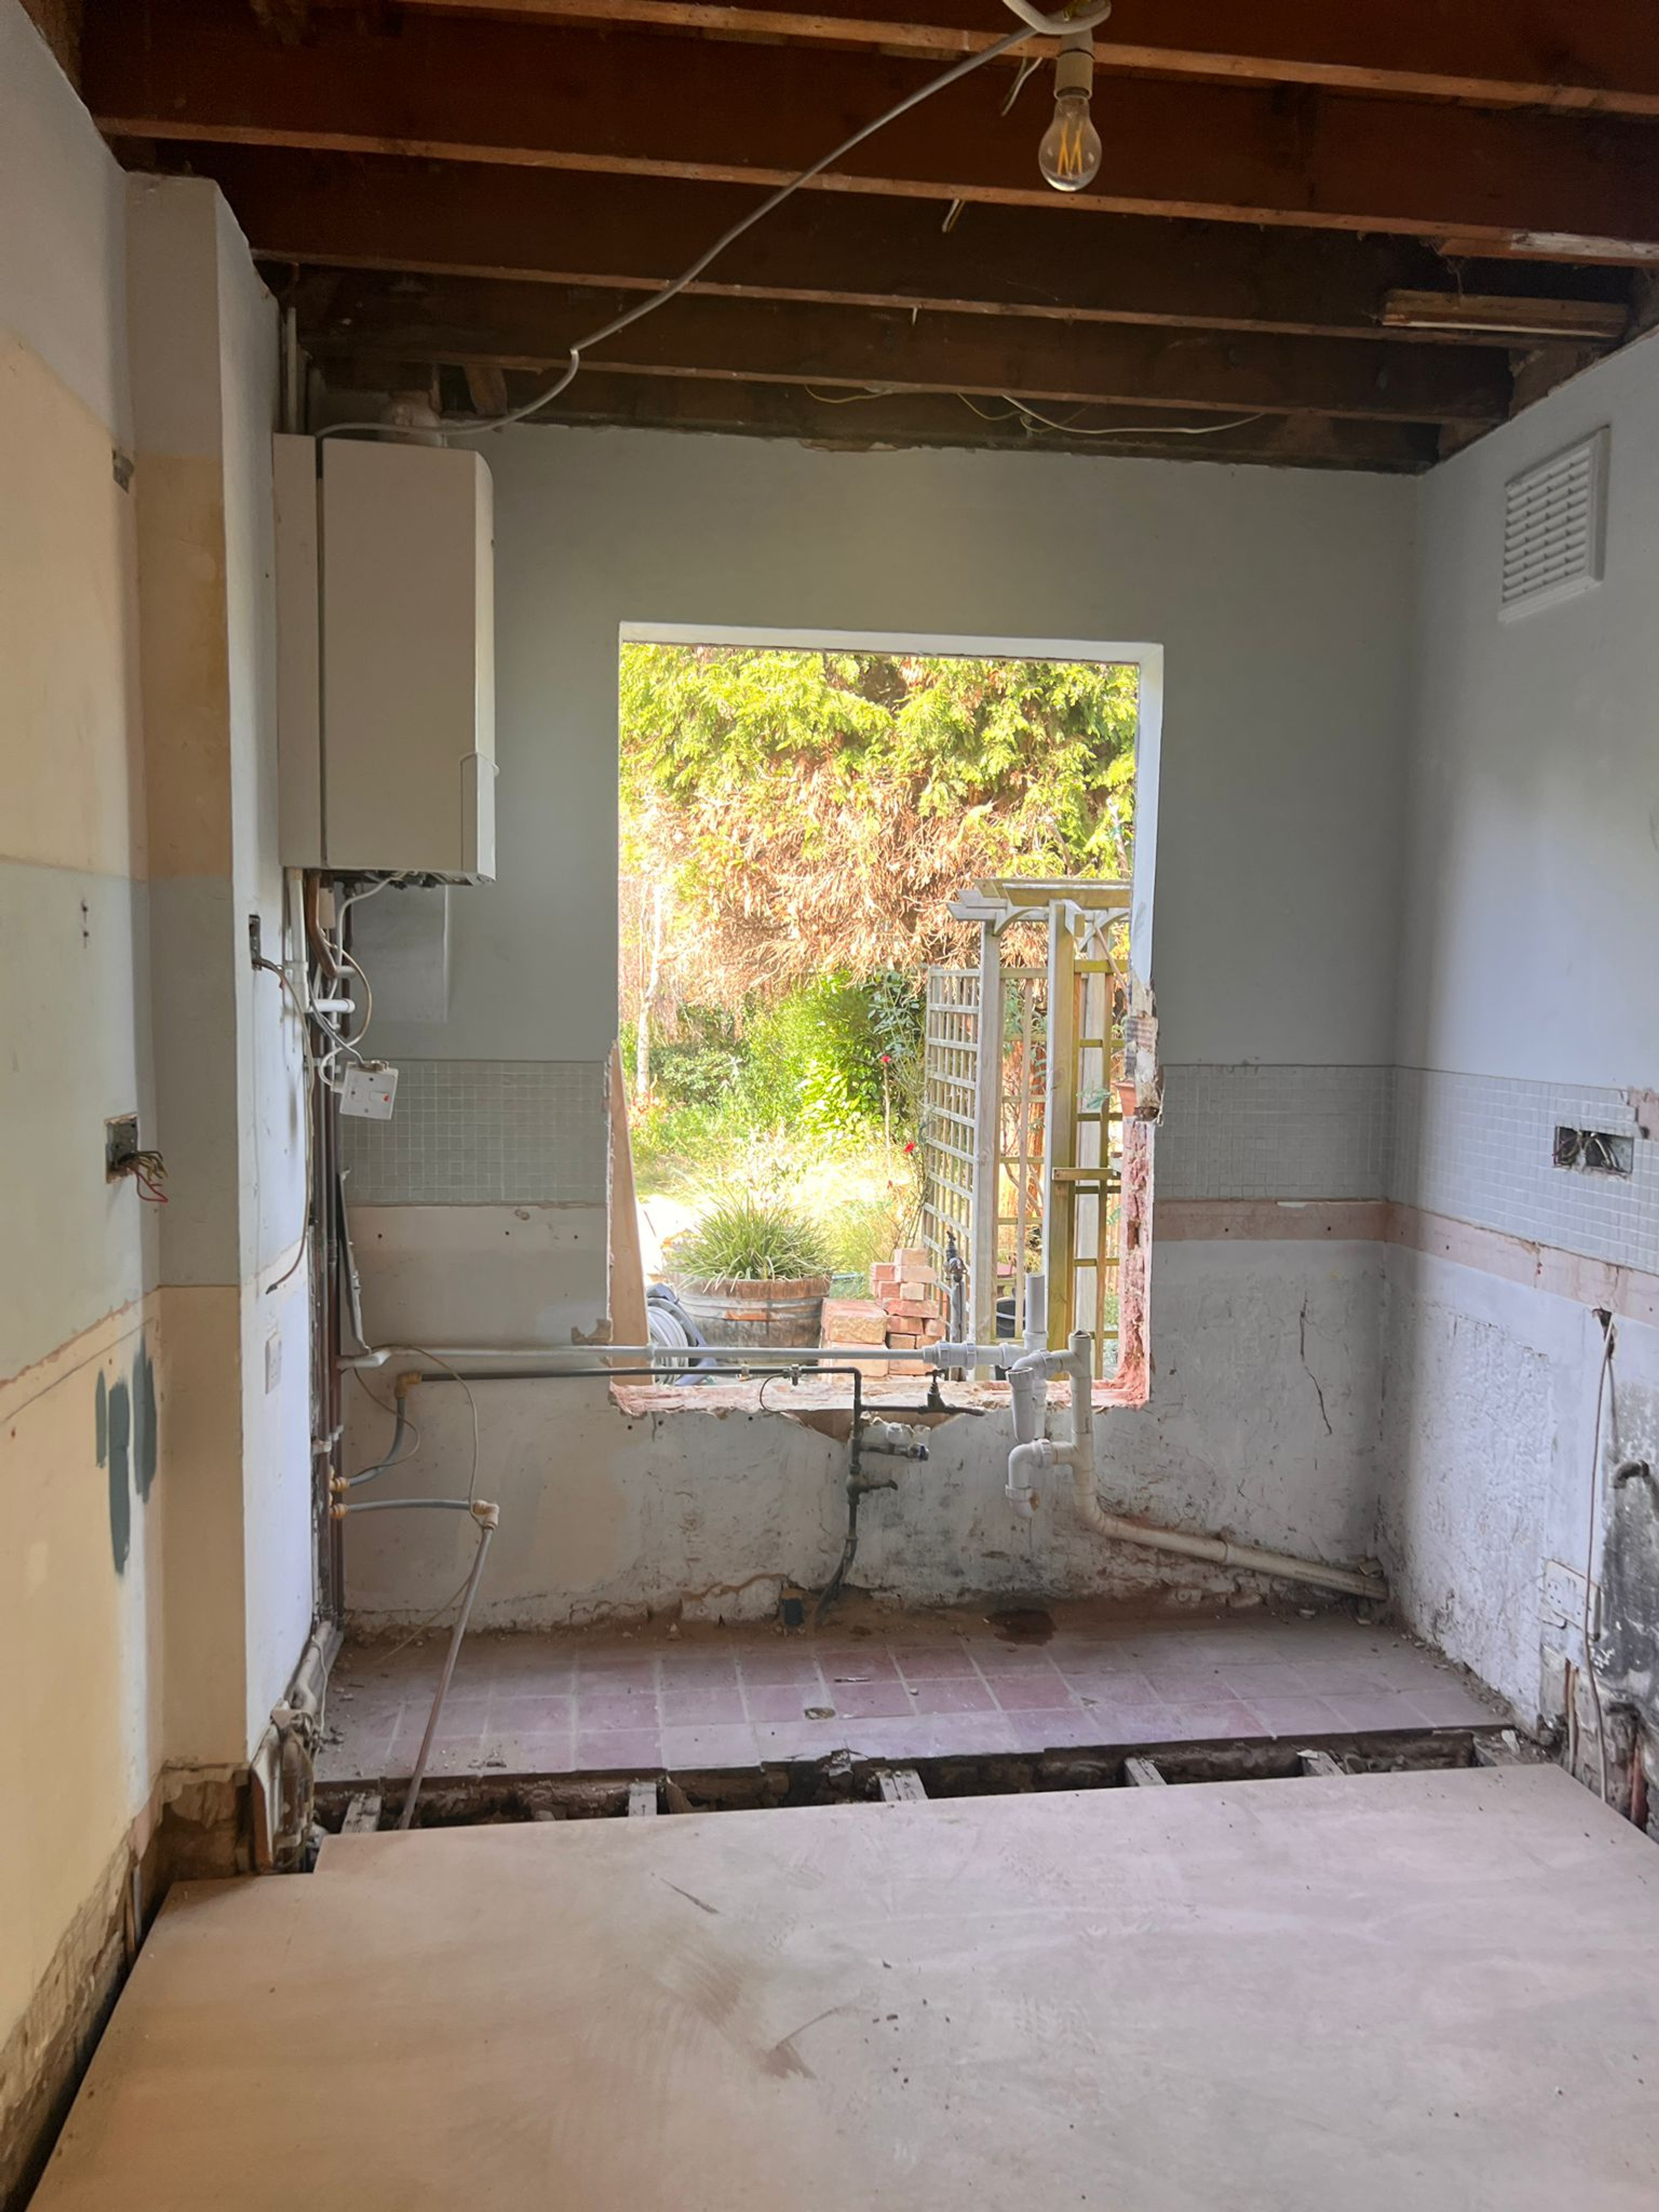 Photo of enlarged window opening in wall.